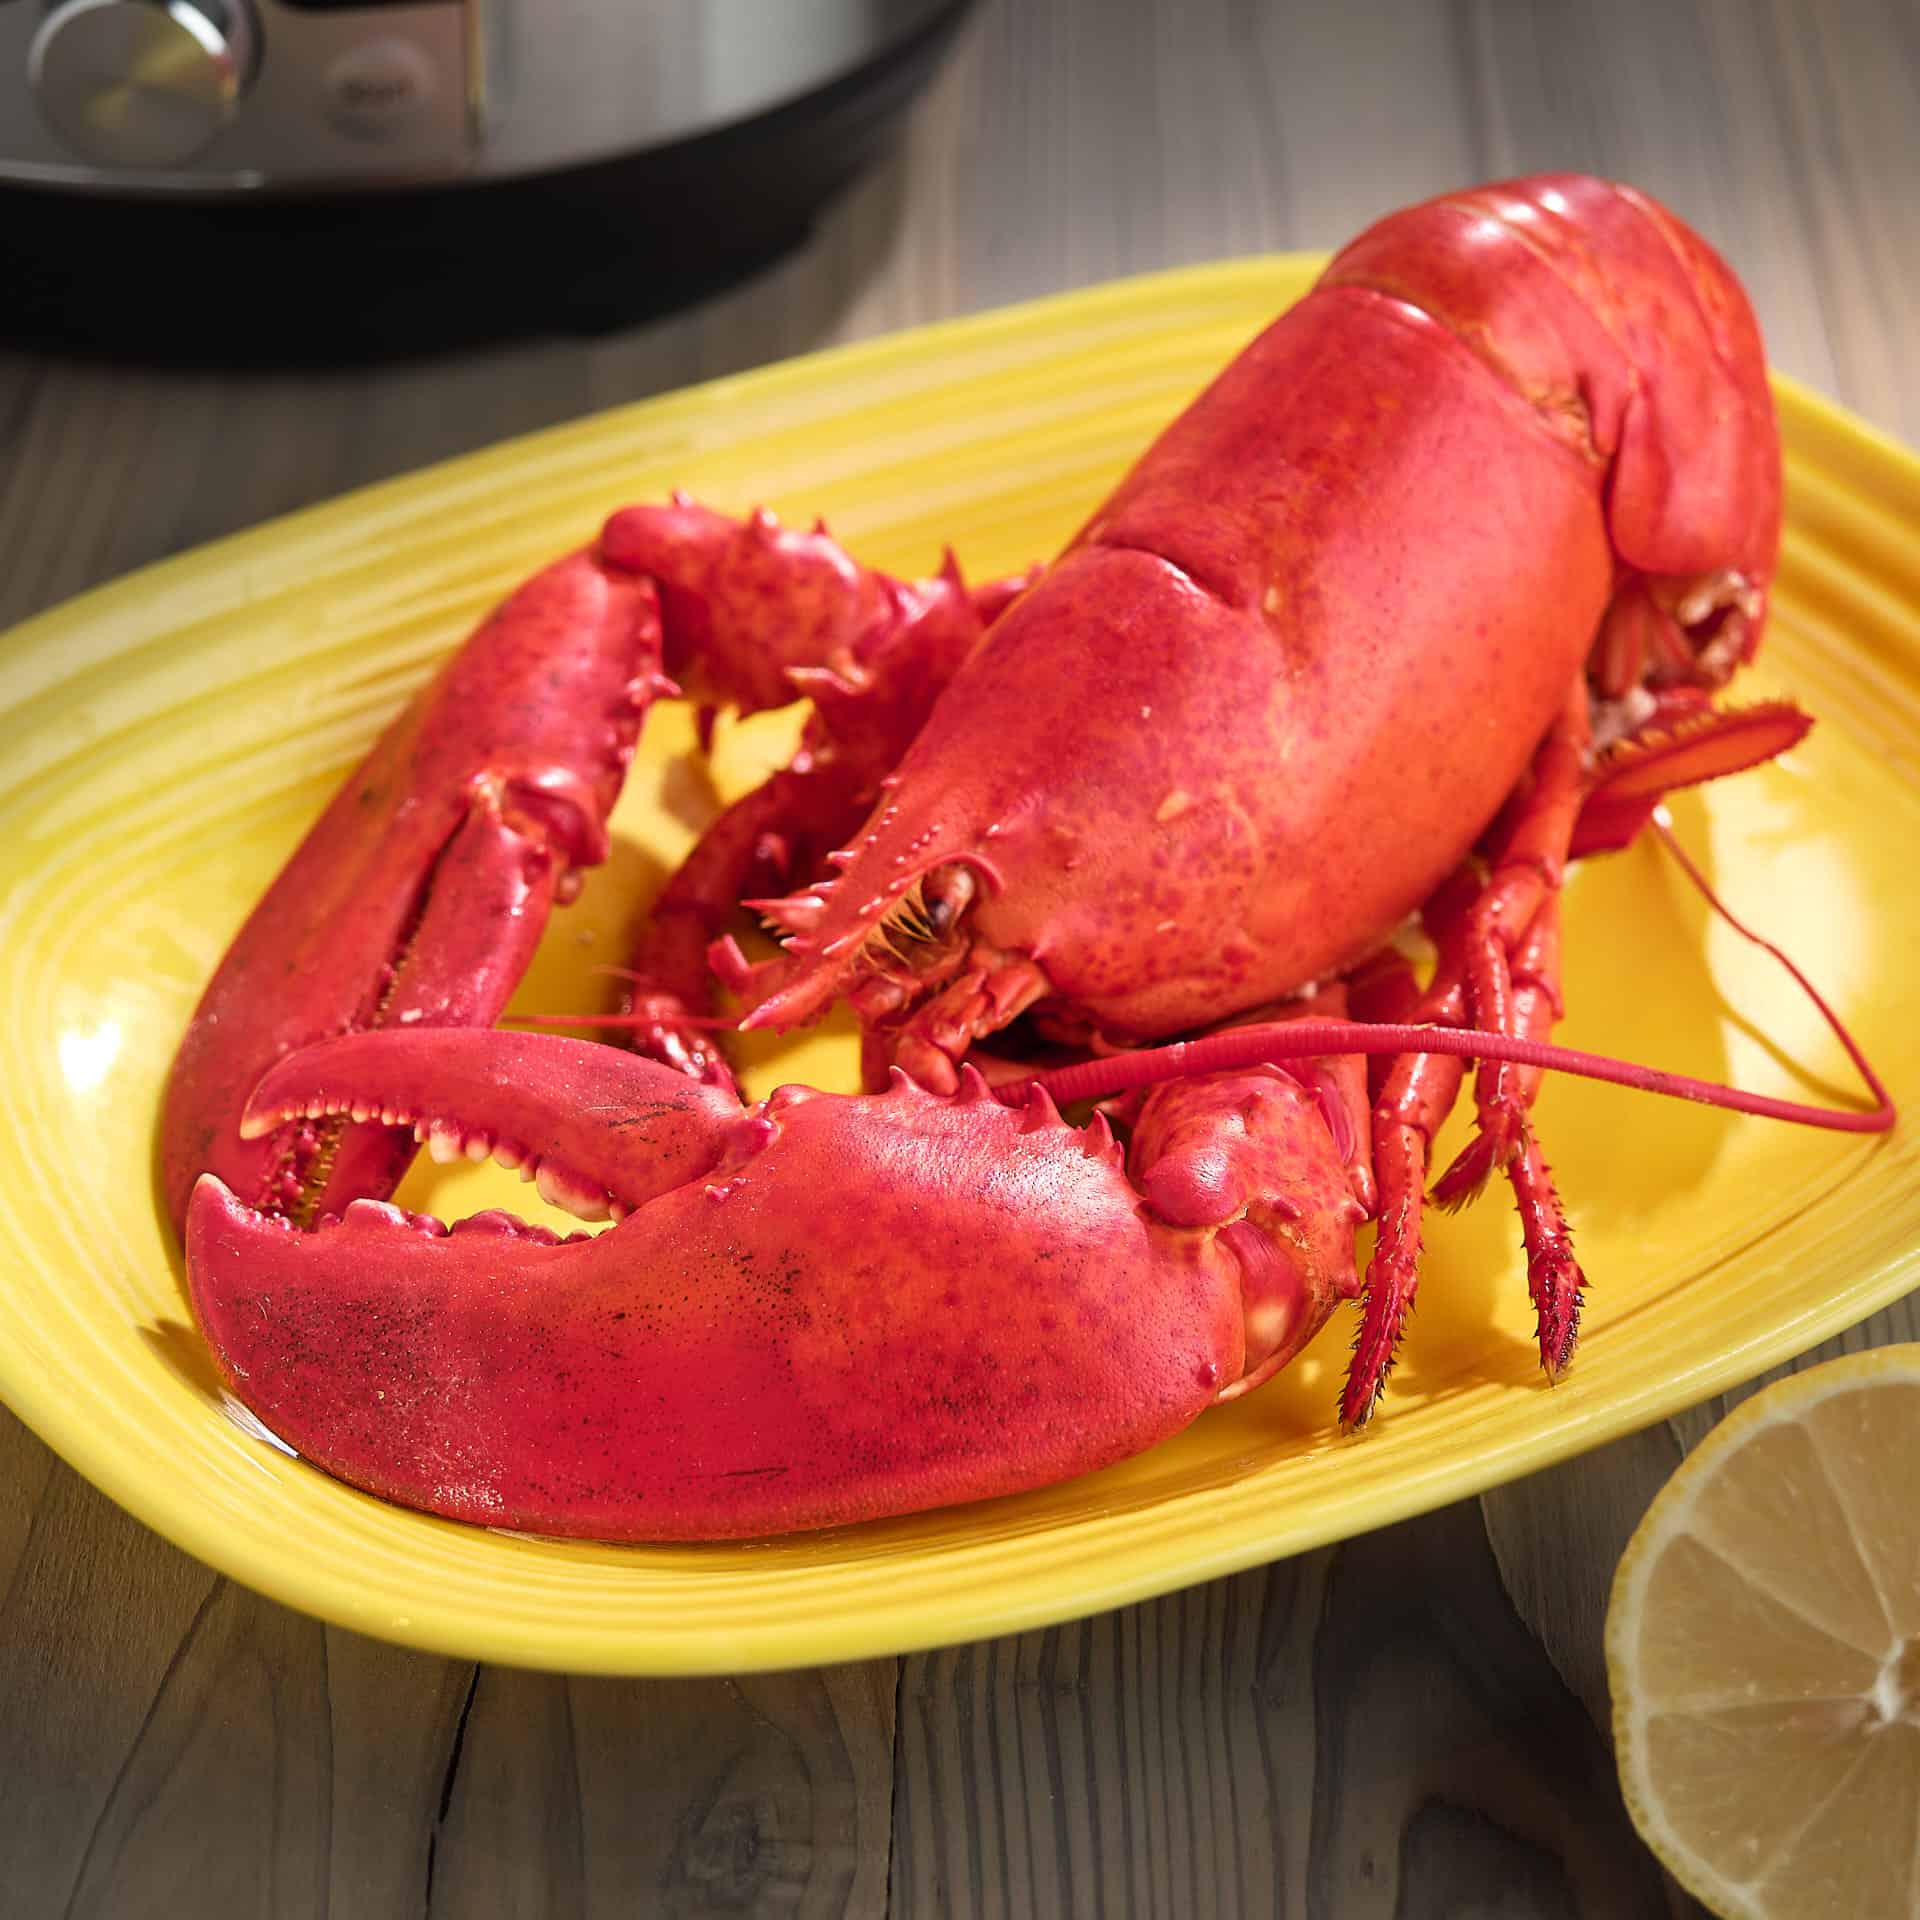 A cooked lobster on a yellow plate, with a lemon and an Instant Pot in the background